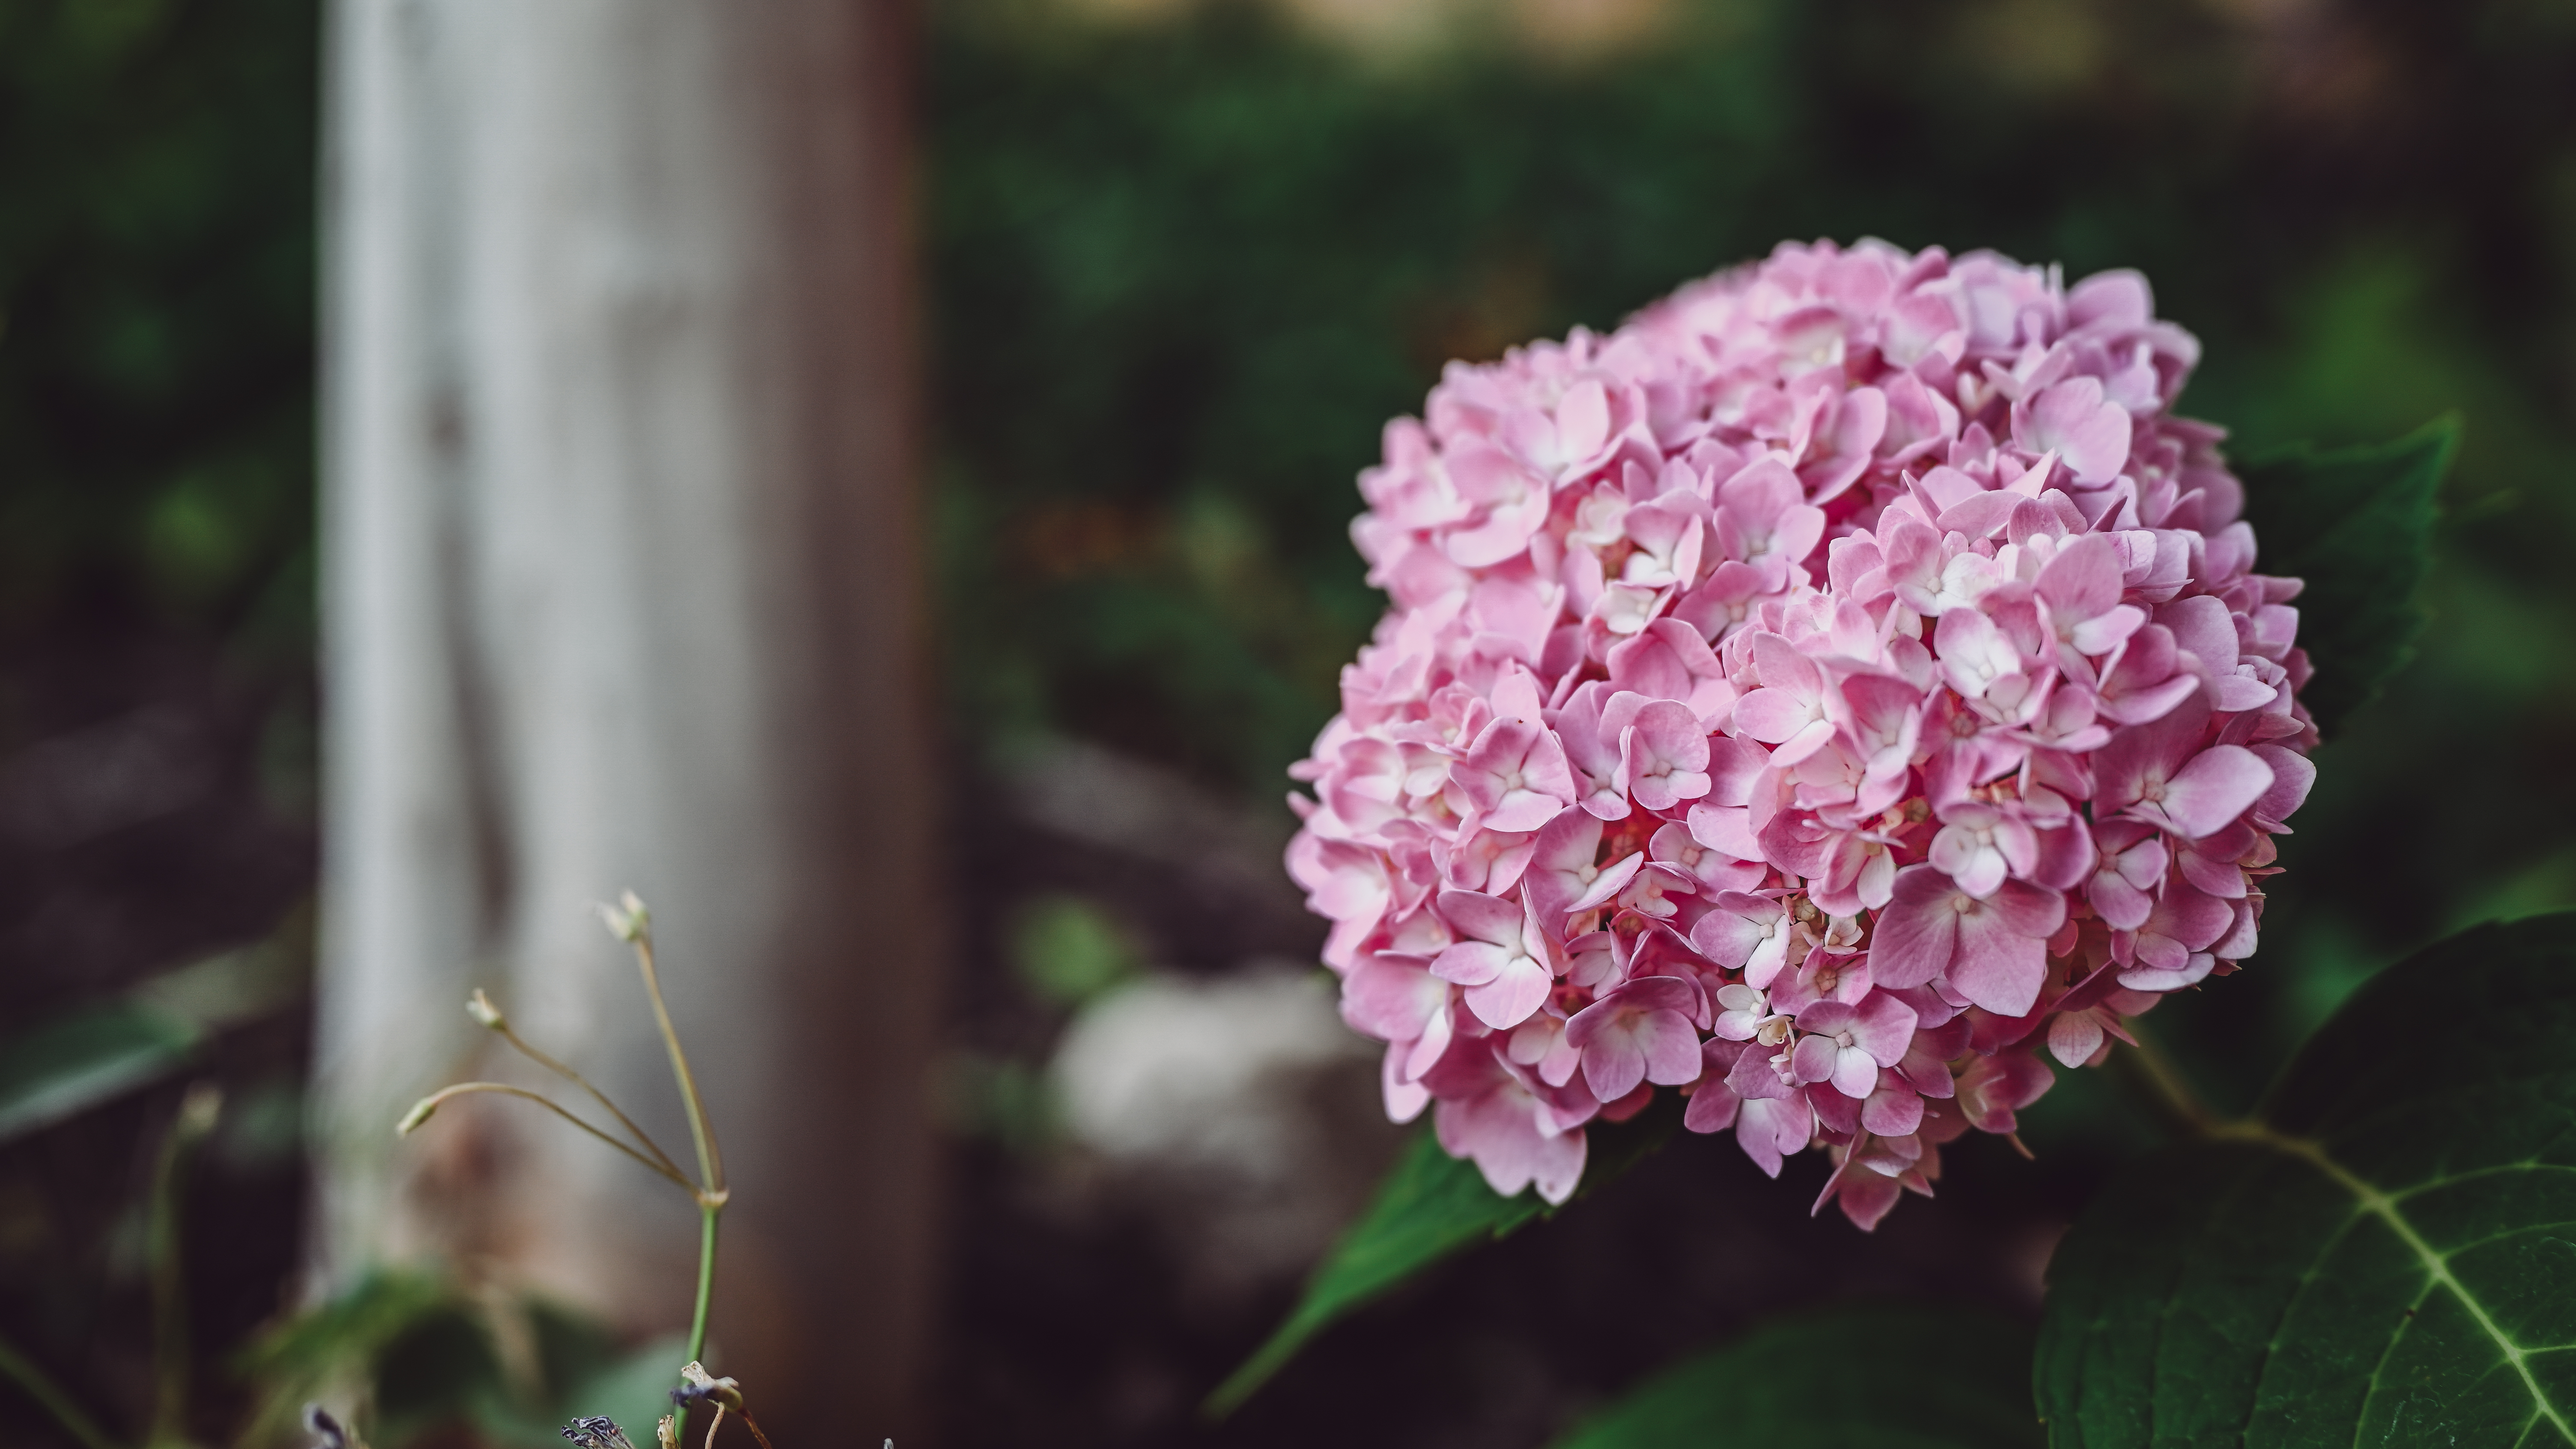 General 6016x3384 nature flowers photography pink flowers outdoors